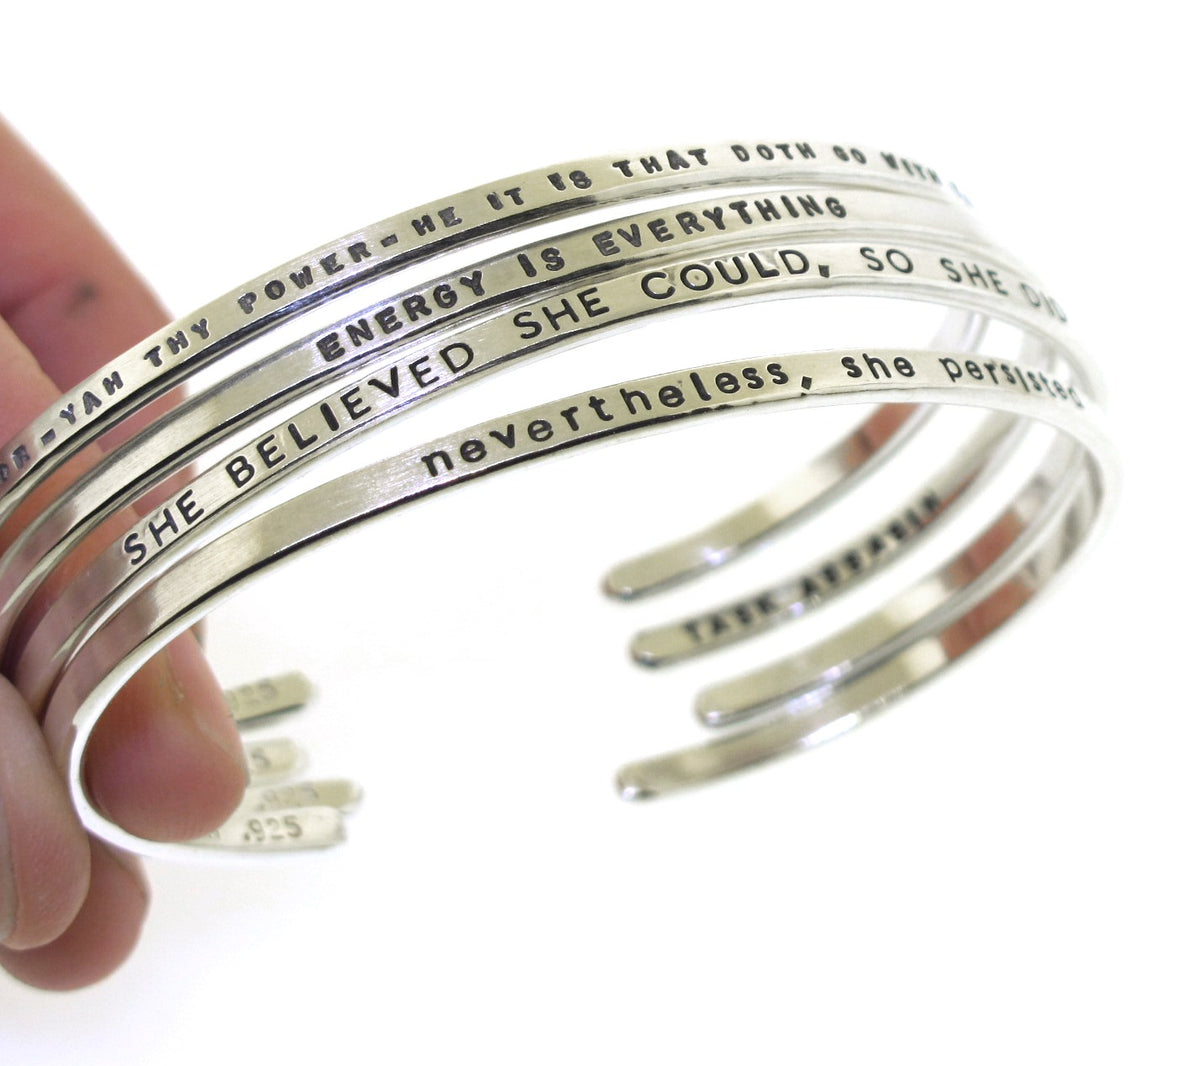 CUFF BRACELET WITH TEXT - Silver